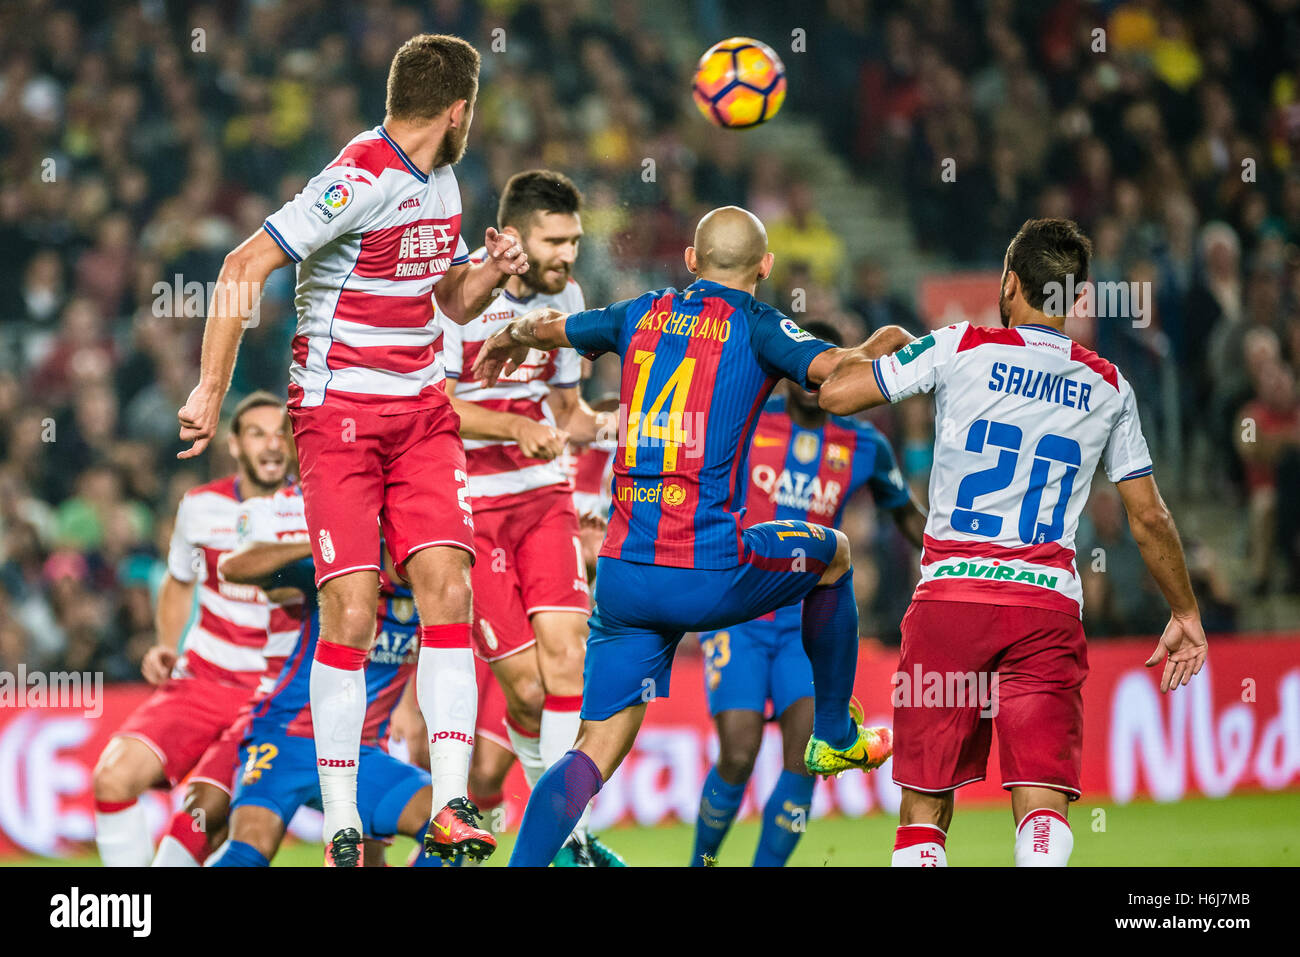 Barcelona, Catalonia, Spain. 29th Oct, 2016. FC Barcelona defender MASCHERANO in action in the LaLiga match between FC Barcelona and Granada CF at the Camp Nou stadium in Barcelona © Matthias Oesterle/ZUMA Wire/Alamy Live News Stock Photo